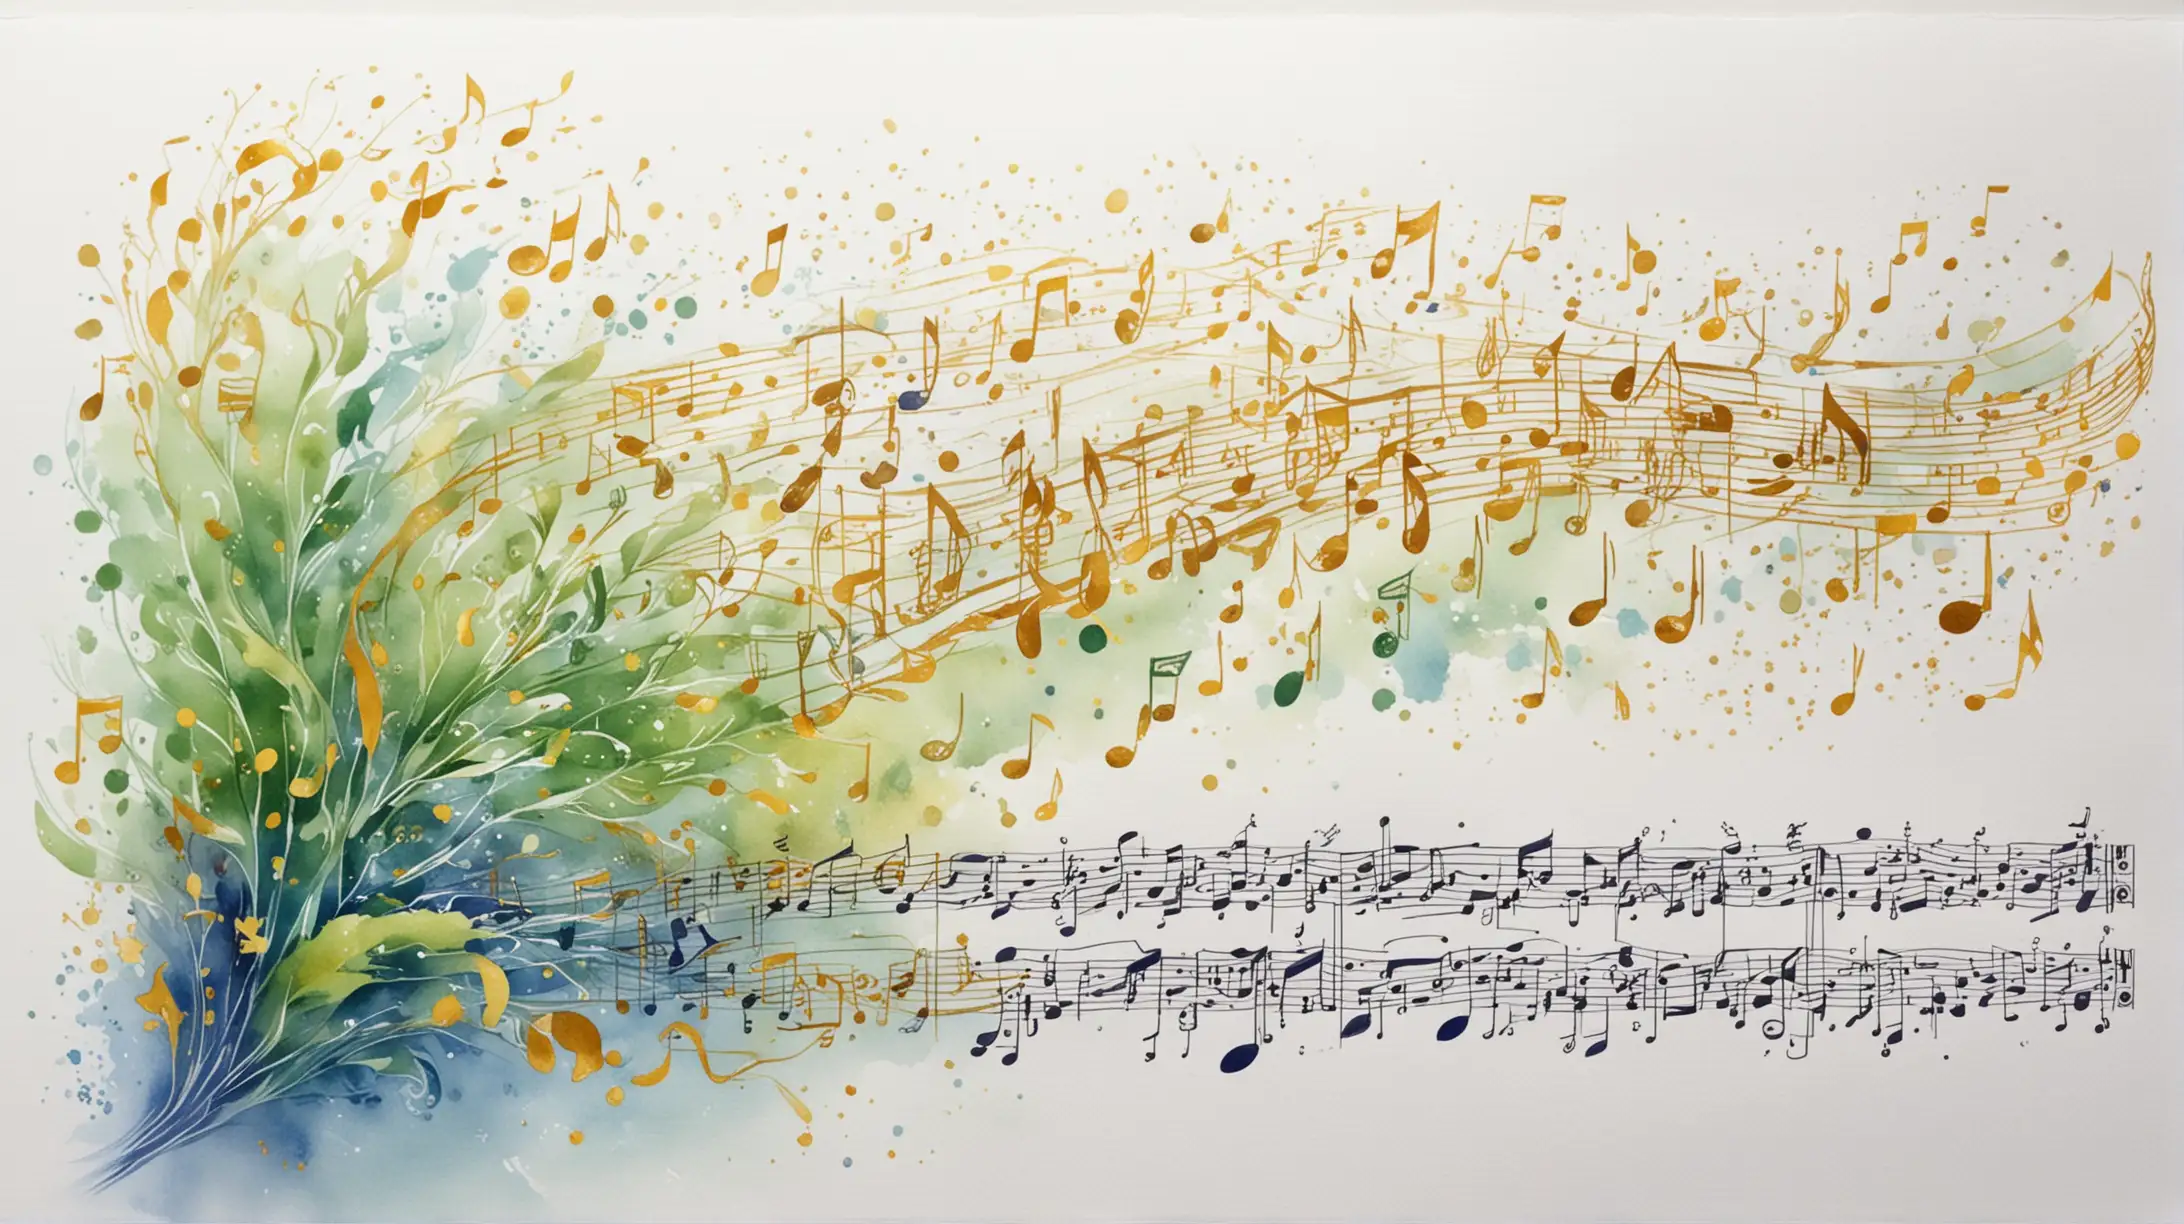 on a white background, painted in watercolor in anime style, curly sheet music with flying golden notes, green, yelou, blue, spring waltz, inspiration, flight, fantasy